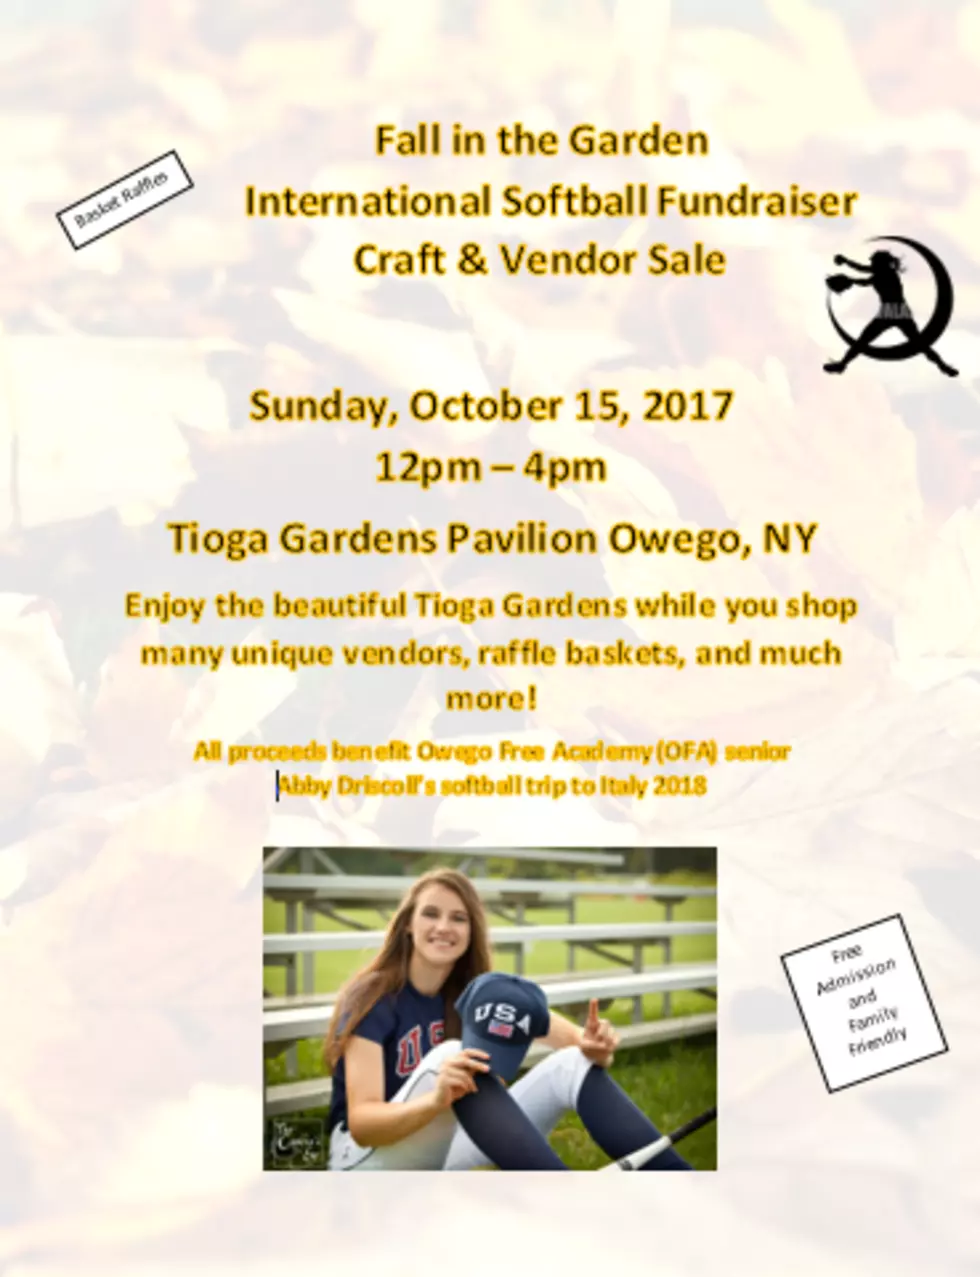 Fall in the Garden Fundraiser Craft &amp; Vendor Event to benefit OFA senior Abby Driscoll&#8217;s International Softball Trip to Italy 2018